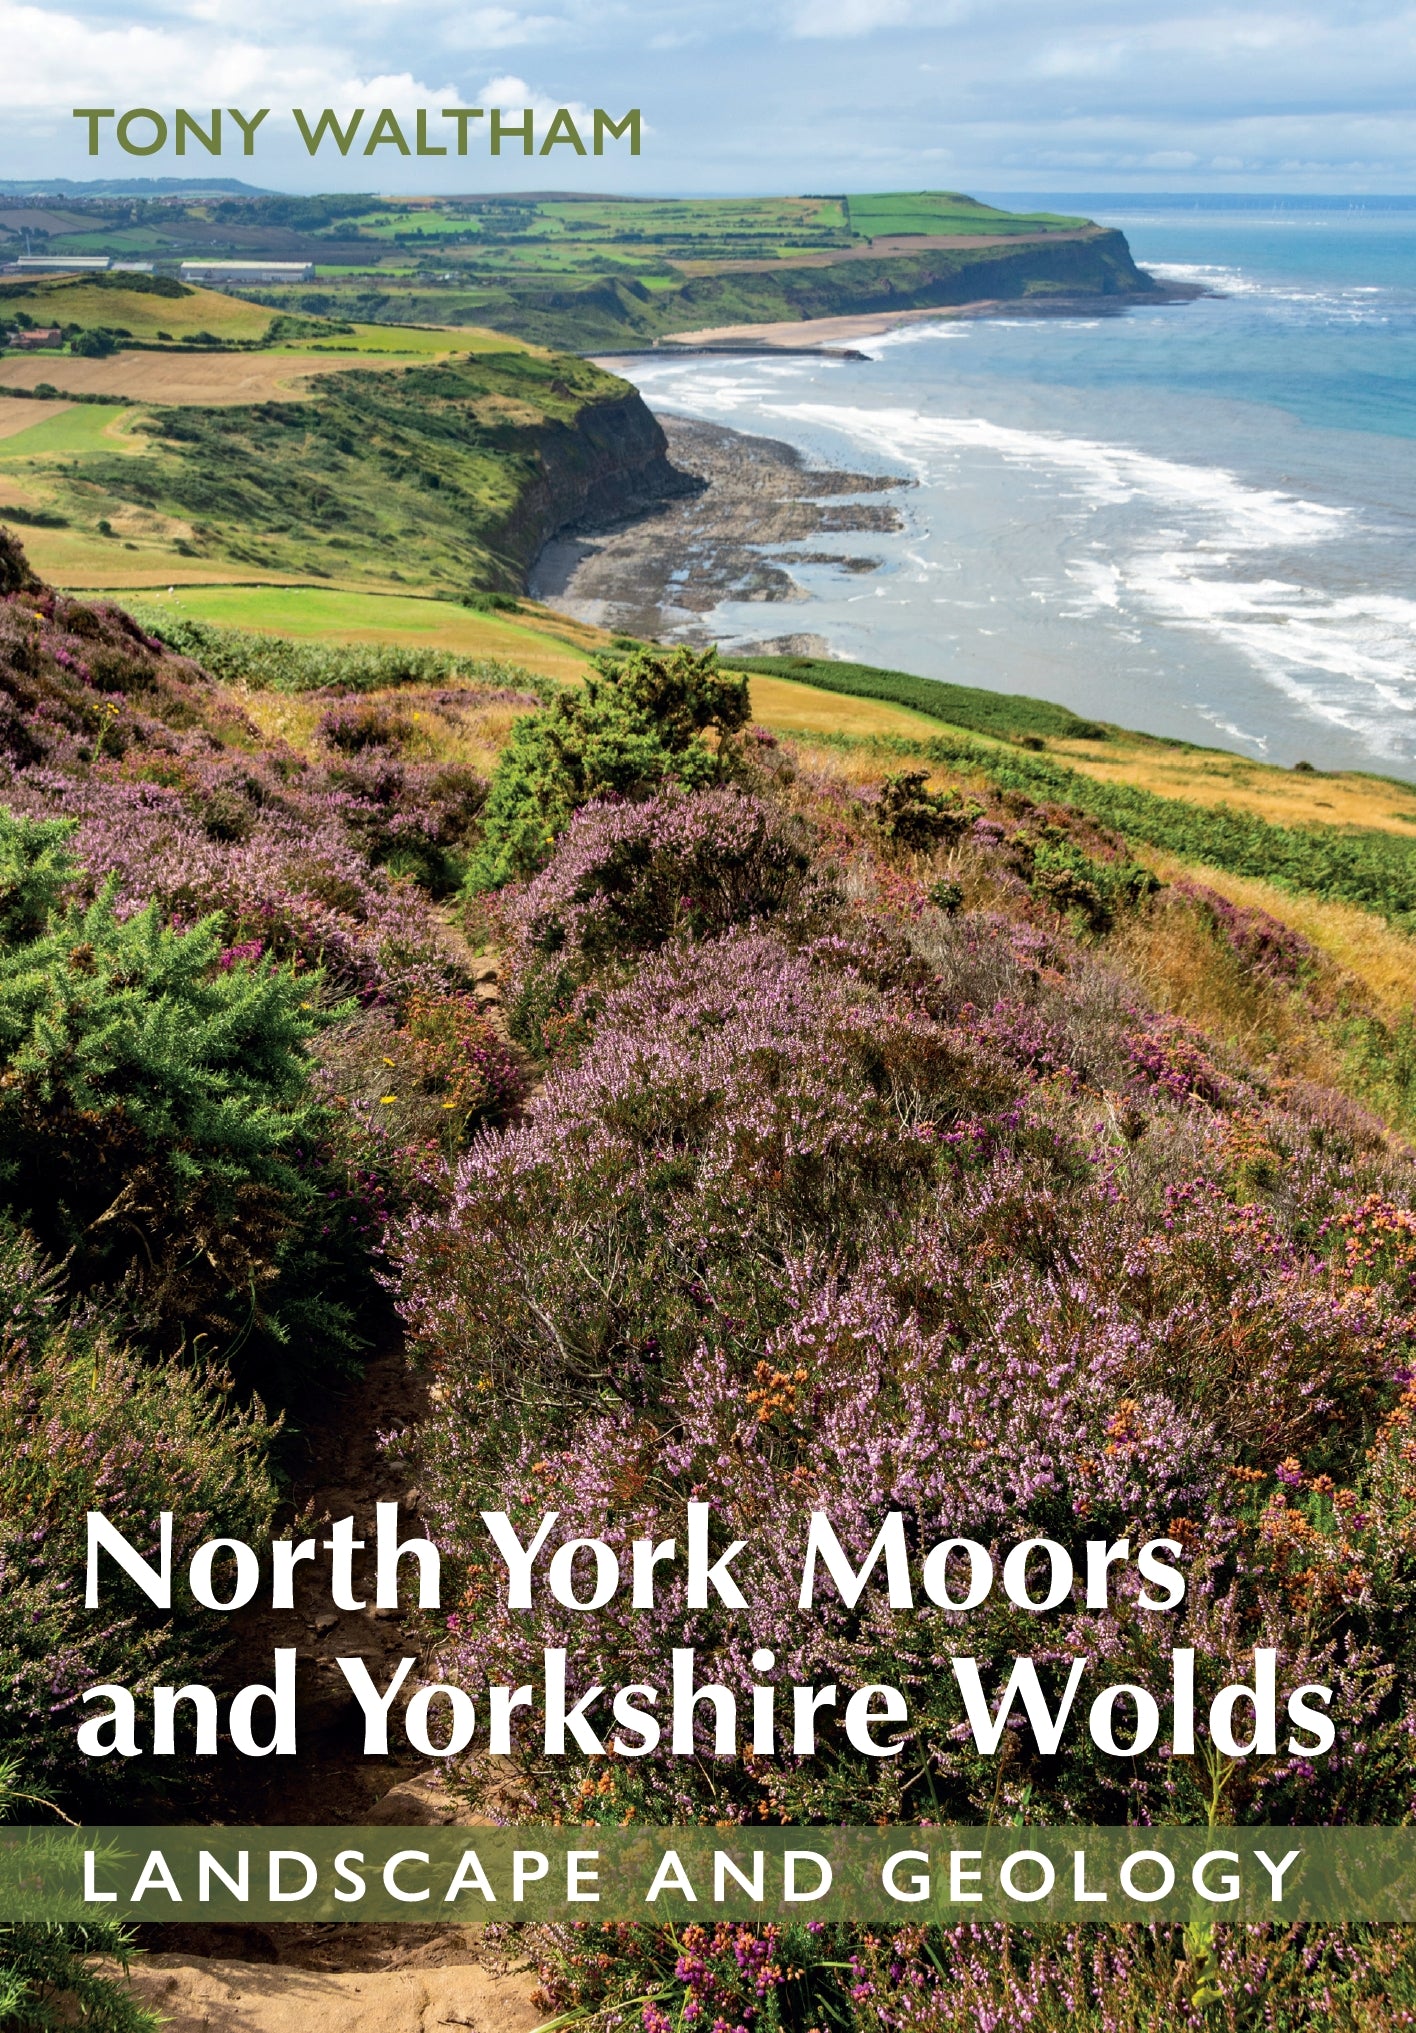 North York Moors and Yorkshire Wolds